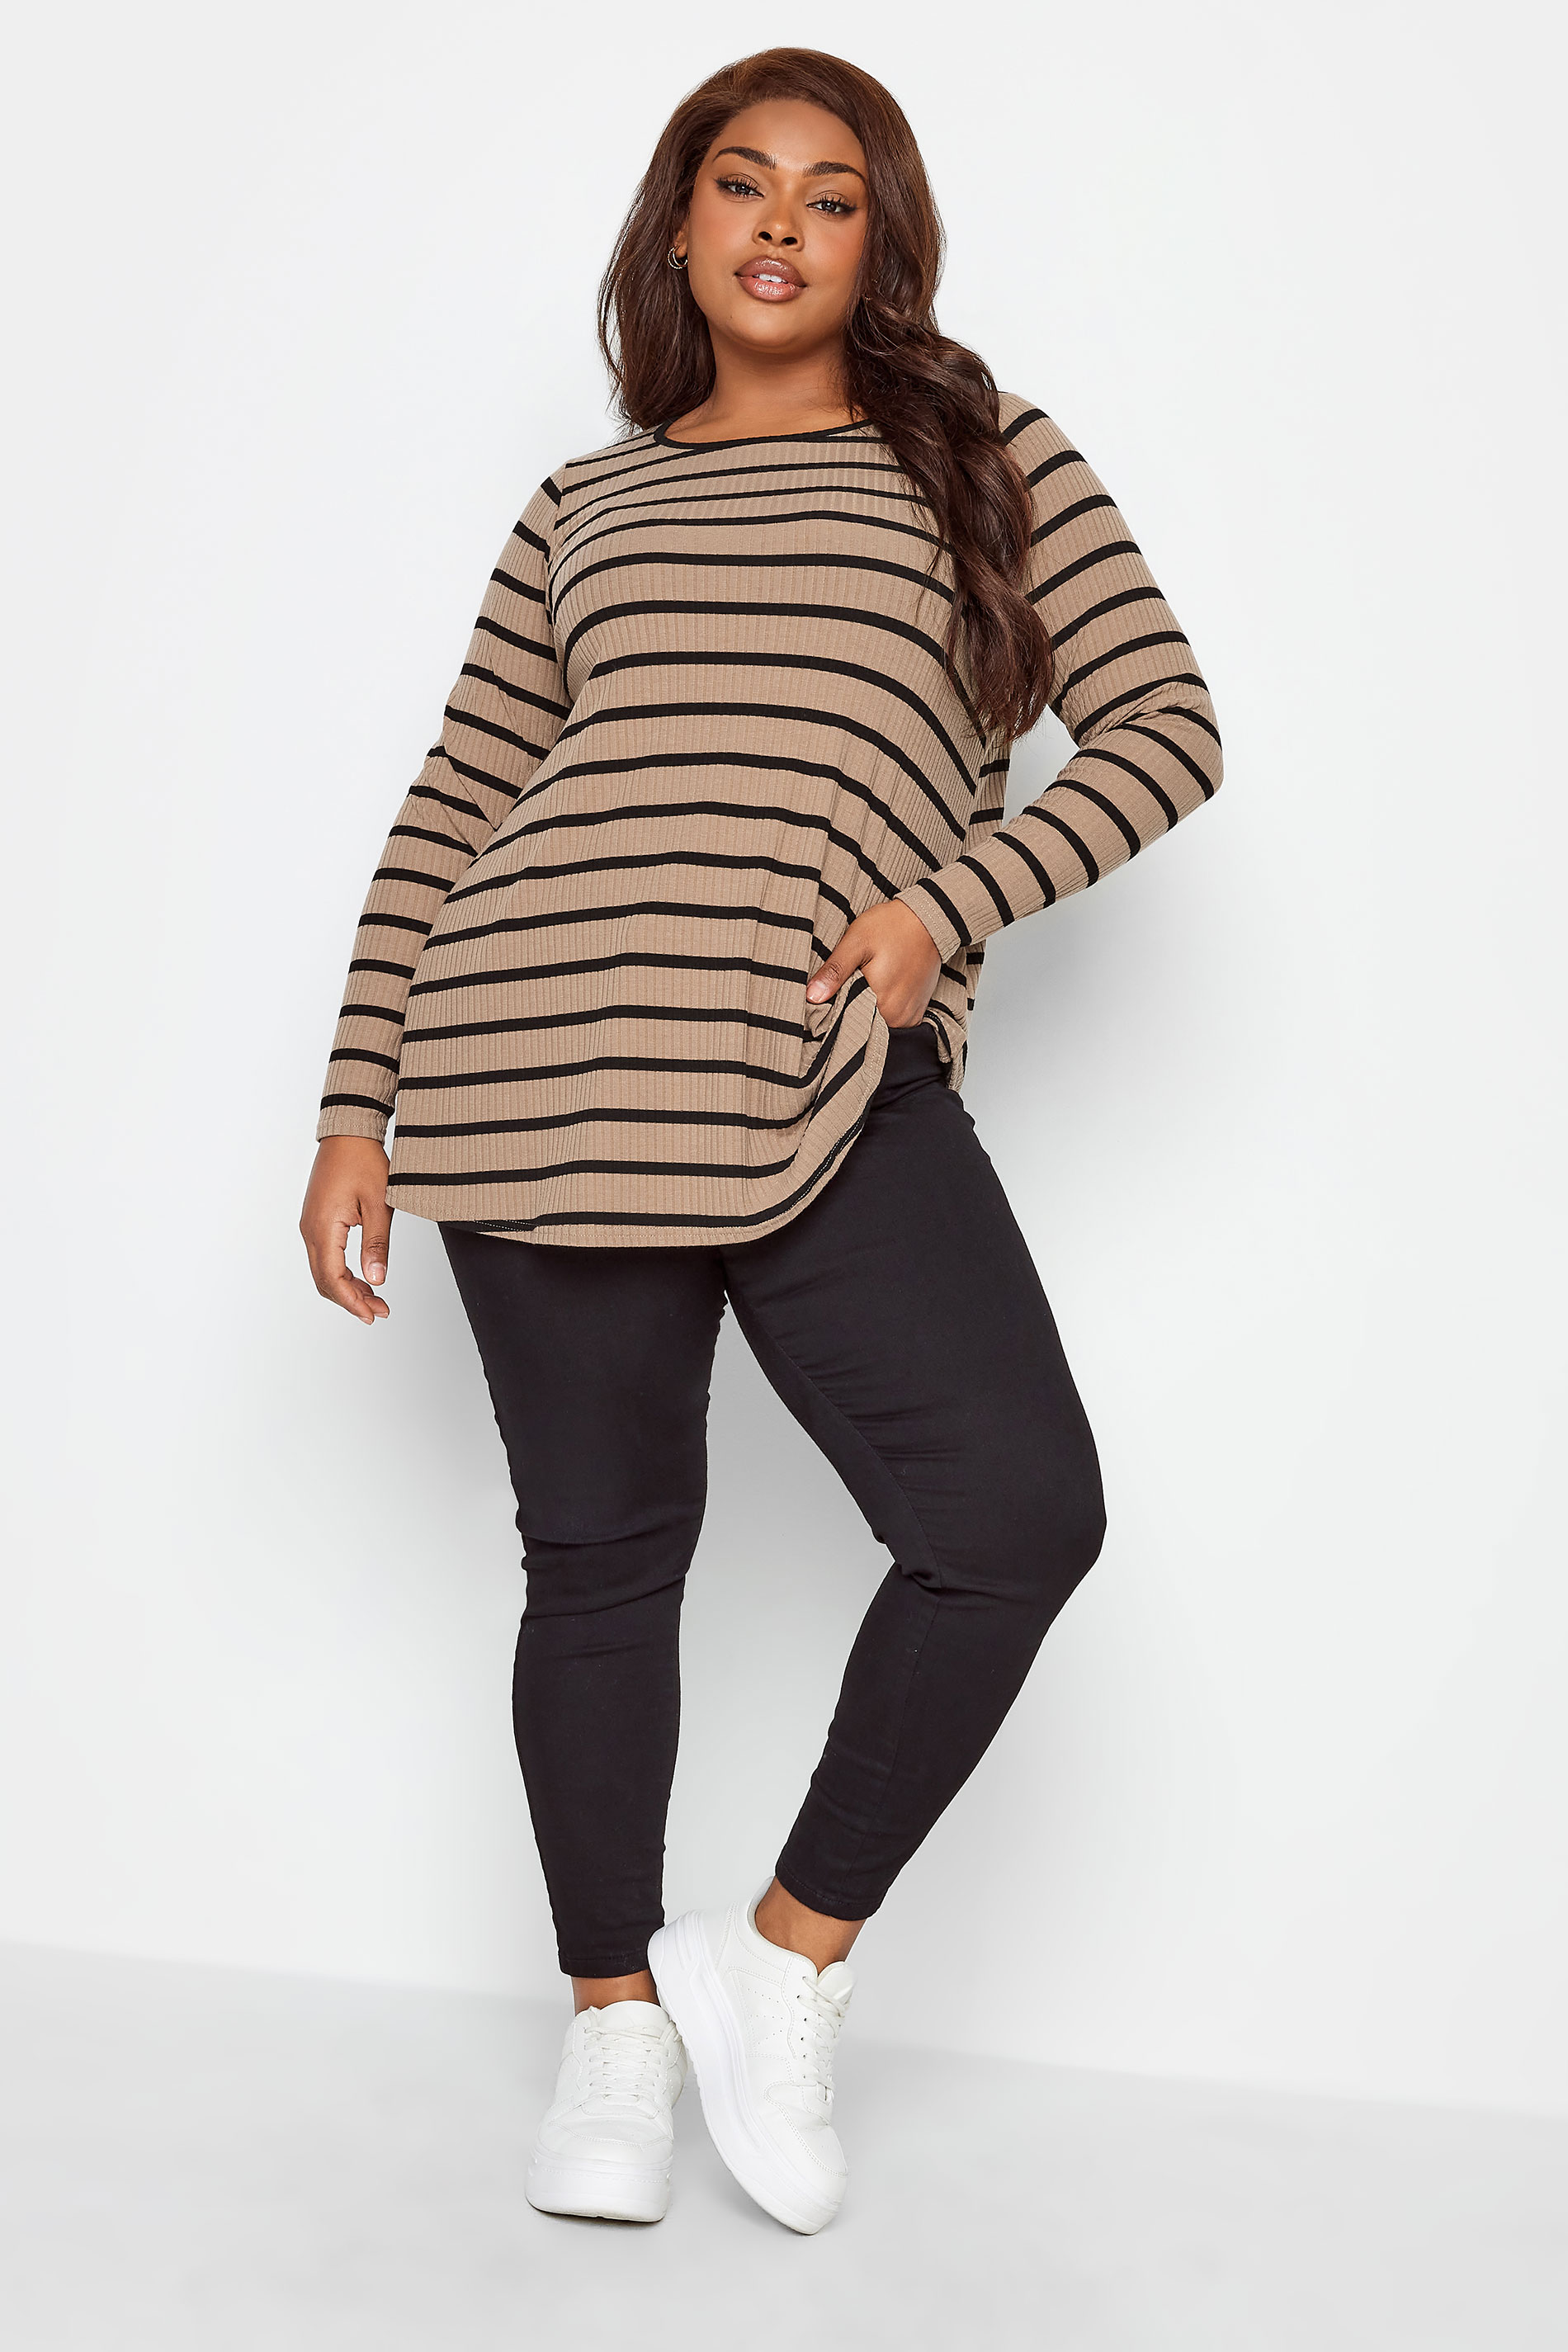 YOURS Curve Plus Size 2 PACK Black & Brown Stripe Ribbed Swing Top | Yours Clothing  3